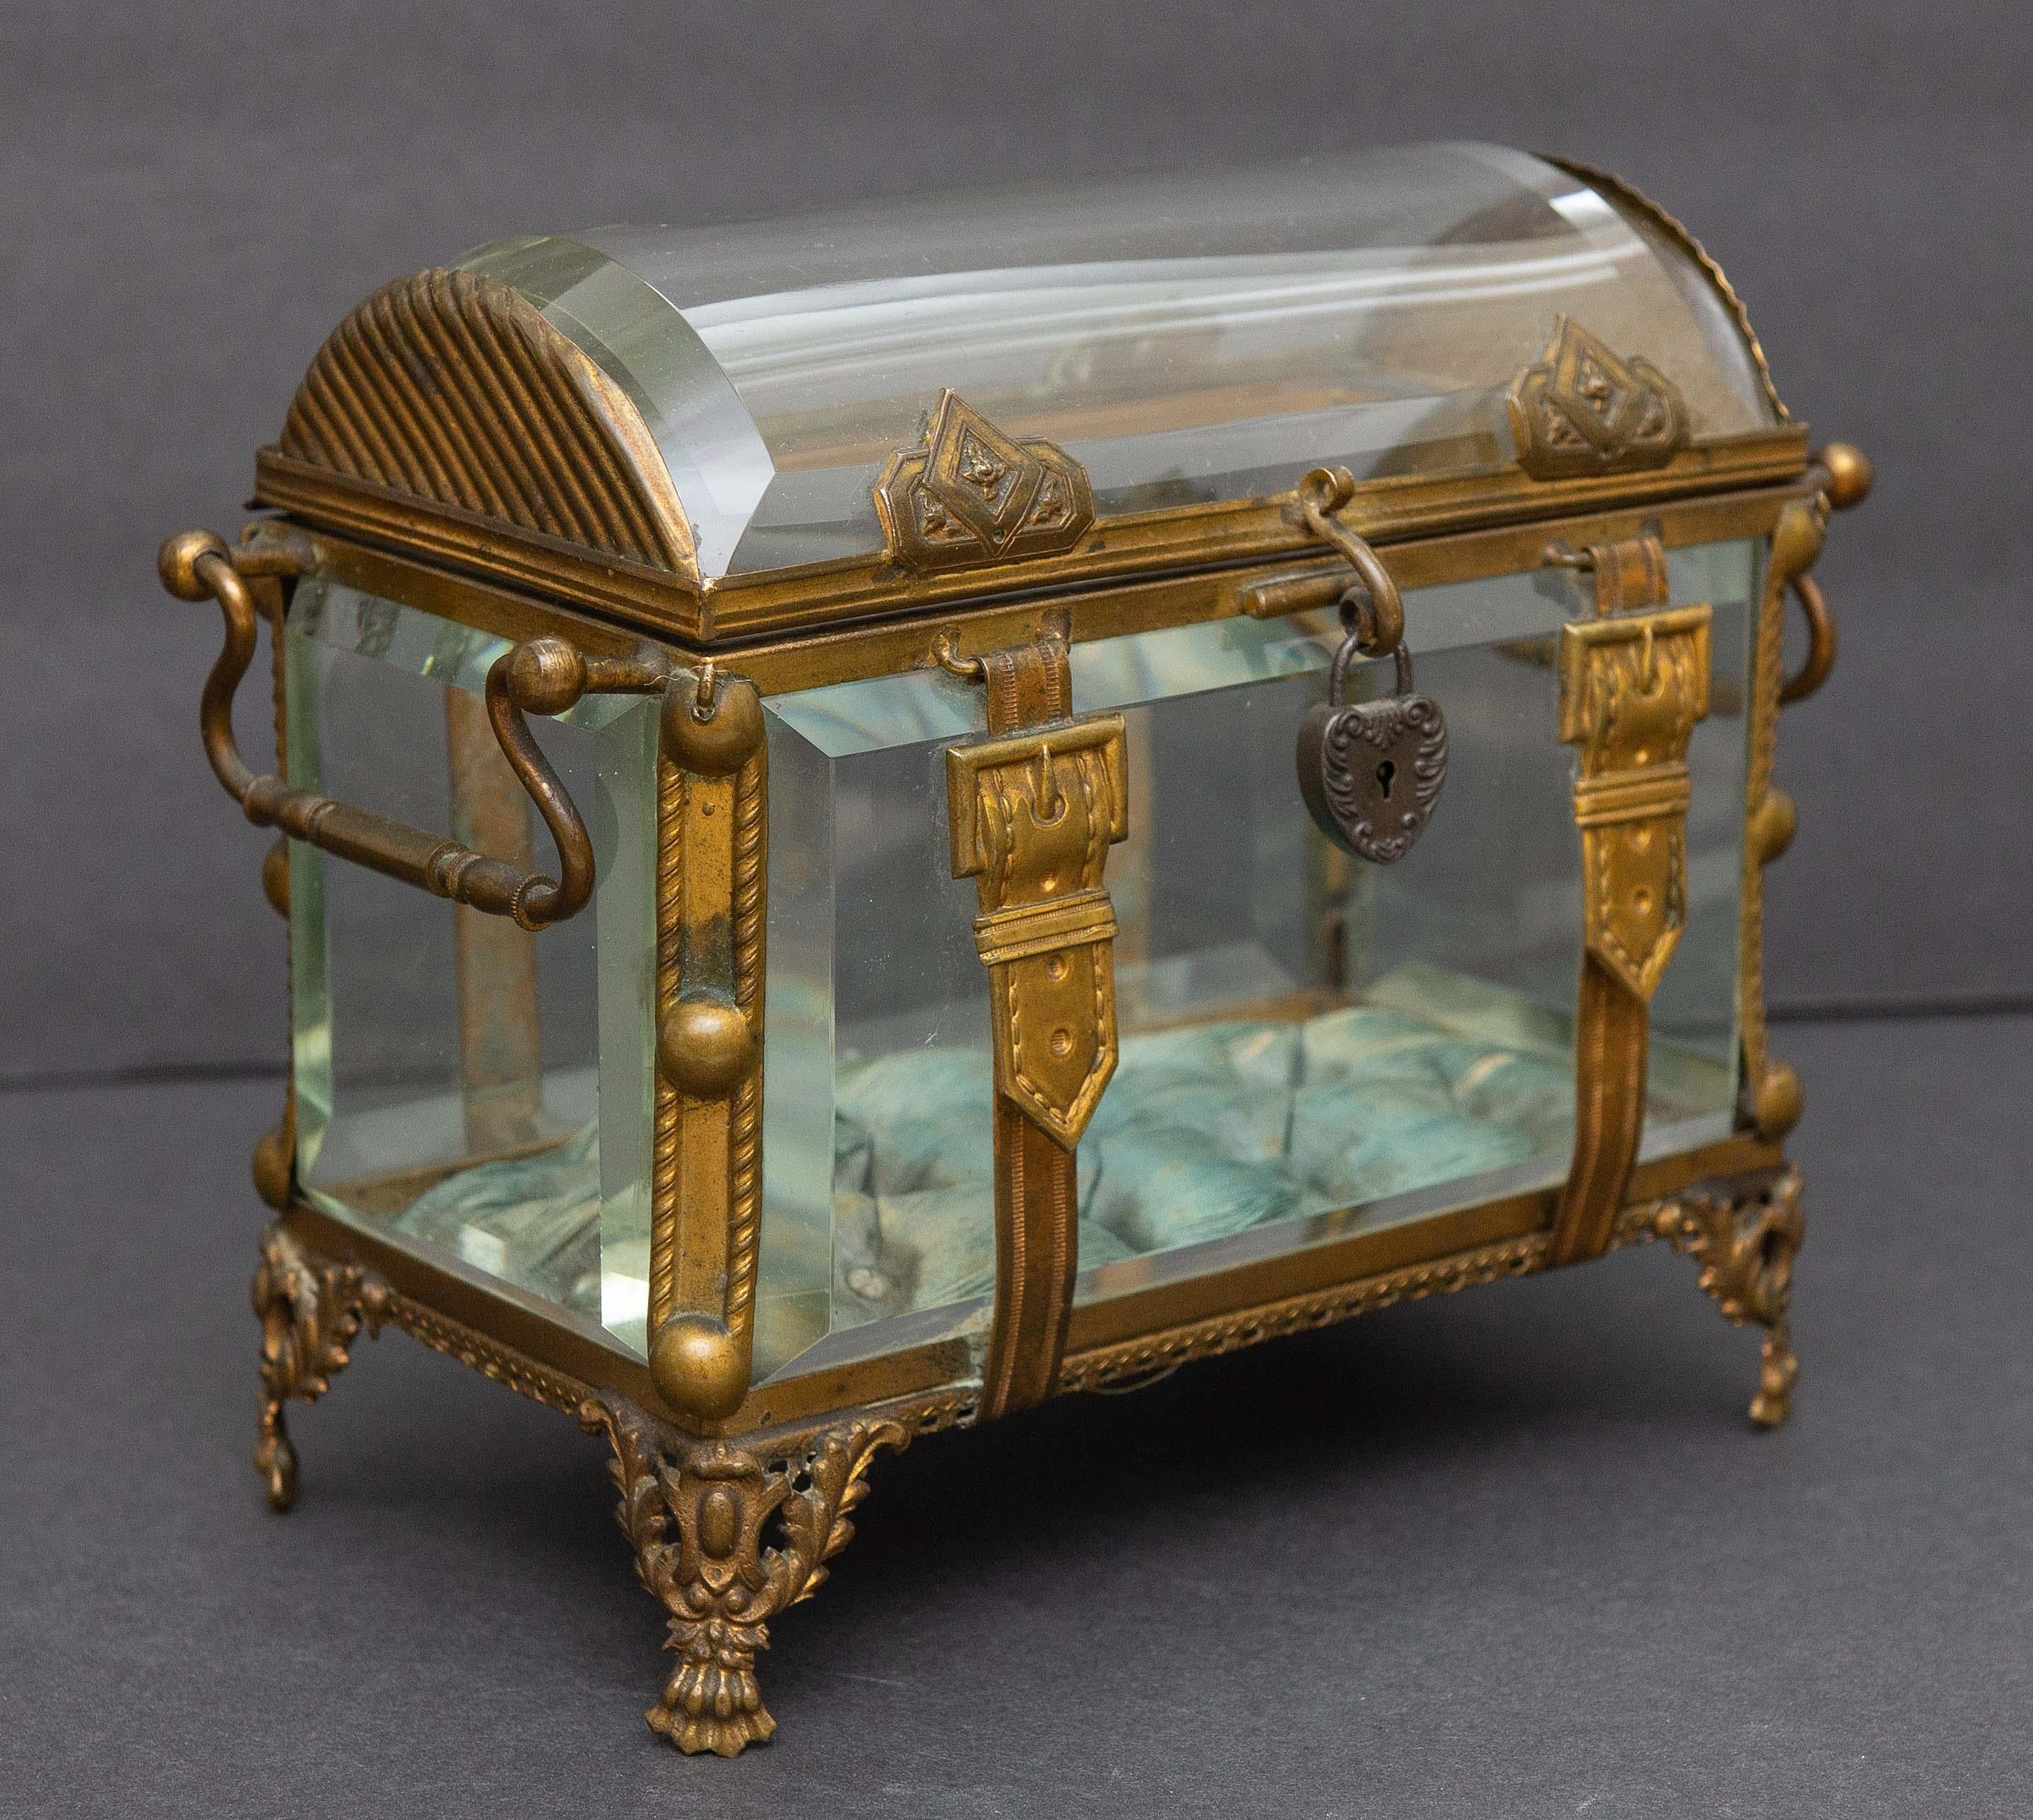 Antique decorative beveled glass with gilt bronze mounts. Curved glass top. With sterling locket. Original blue silk interior.
Presented by Joseph Dasta Antiques.